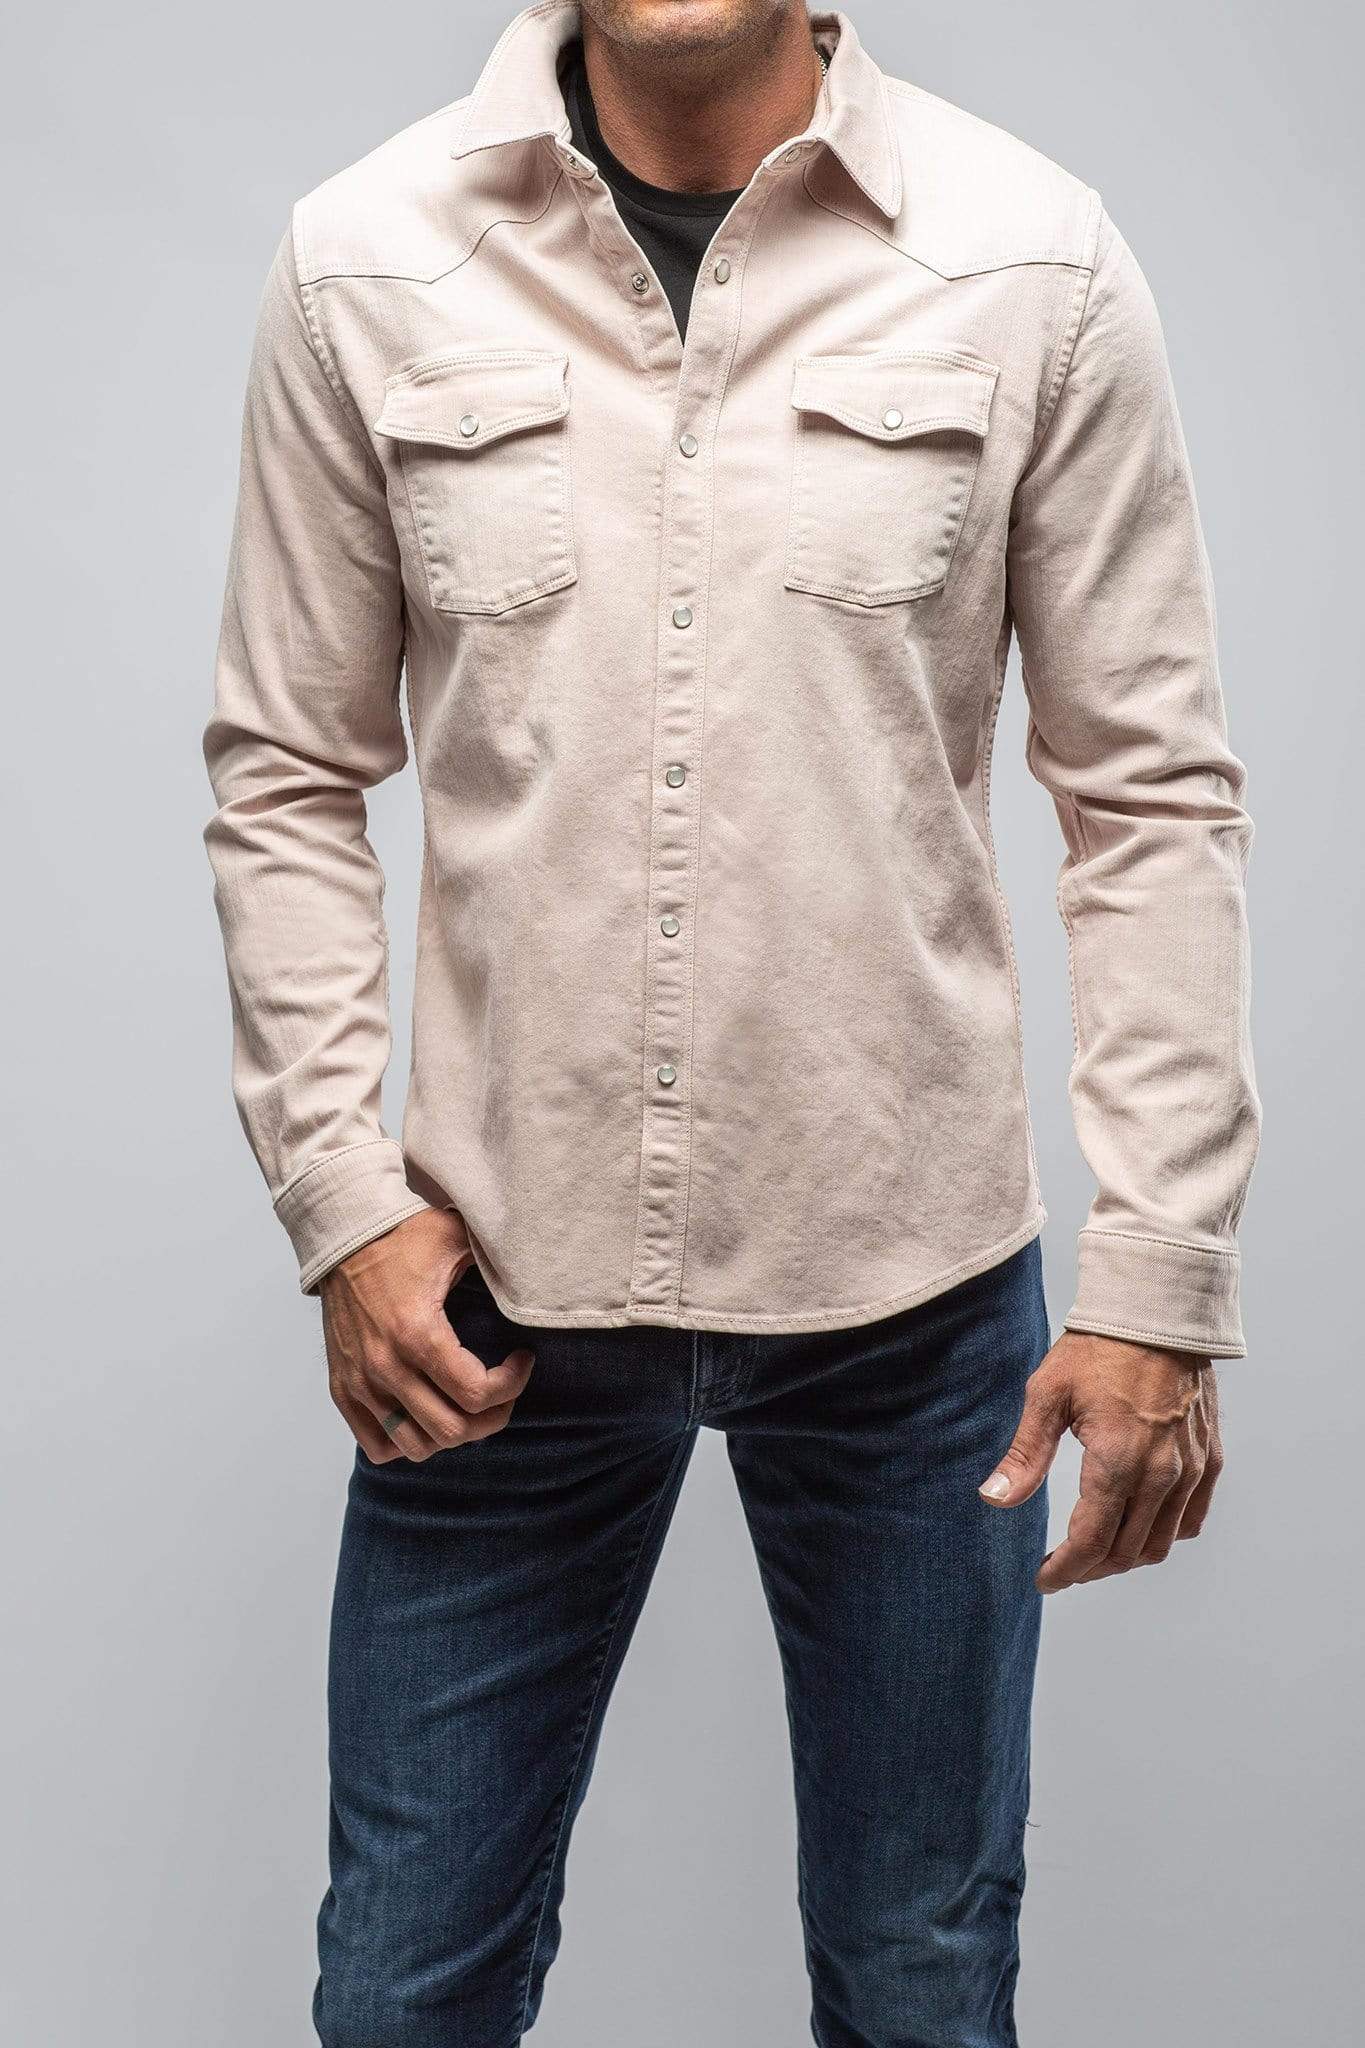 Tan Crew-neck T-shirt with Beige Denim Jacket Outfits For Men (5 ideas &  outfits) | Lookastic